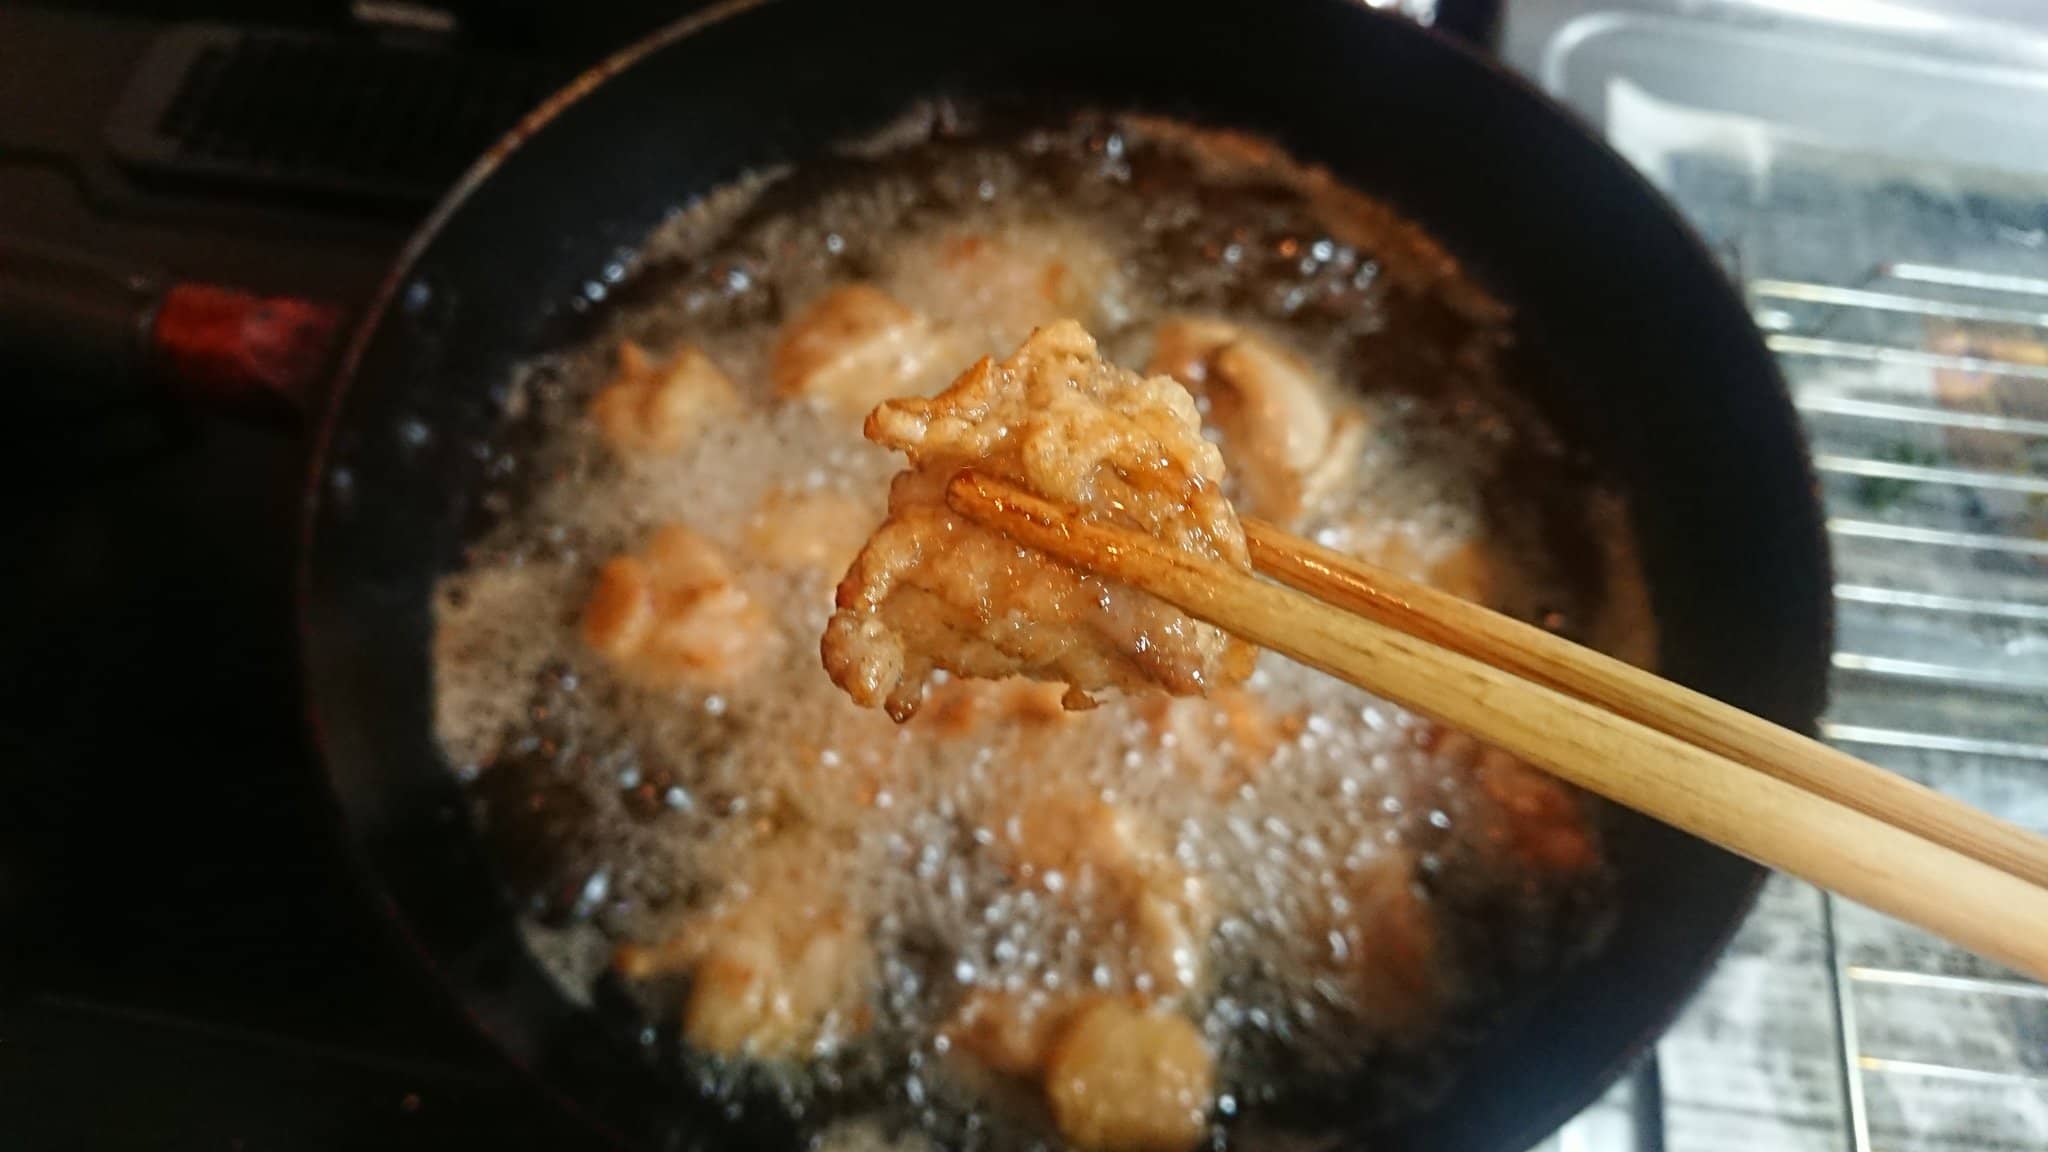 Pan filled with hot bubbling oil and small pieces of chicken and in the foreground a pair of chopsticks holding a piece of fried chicken